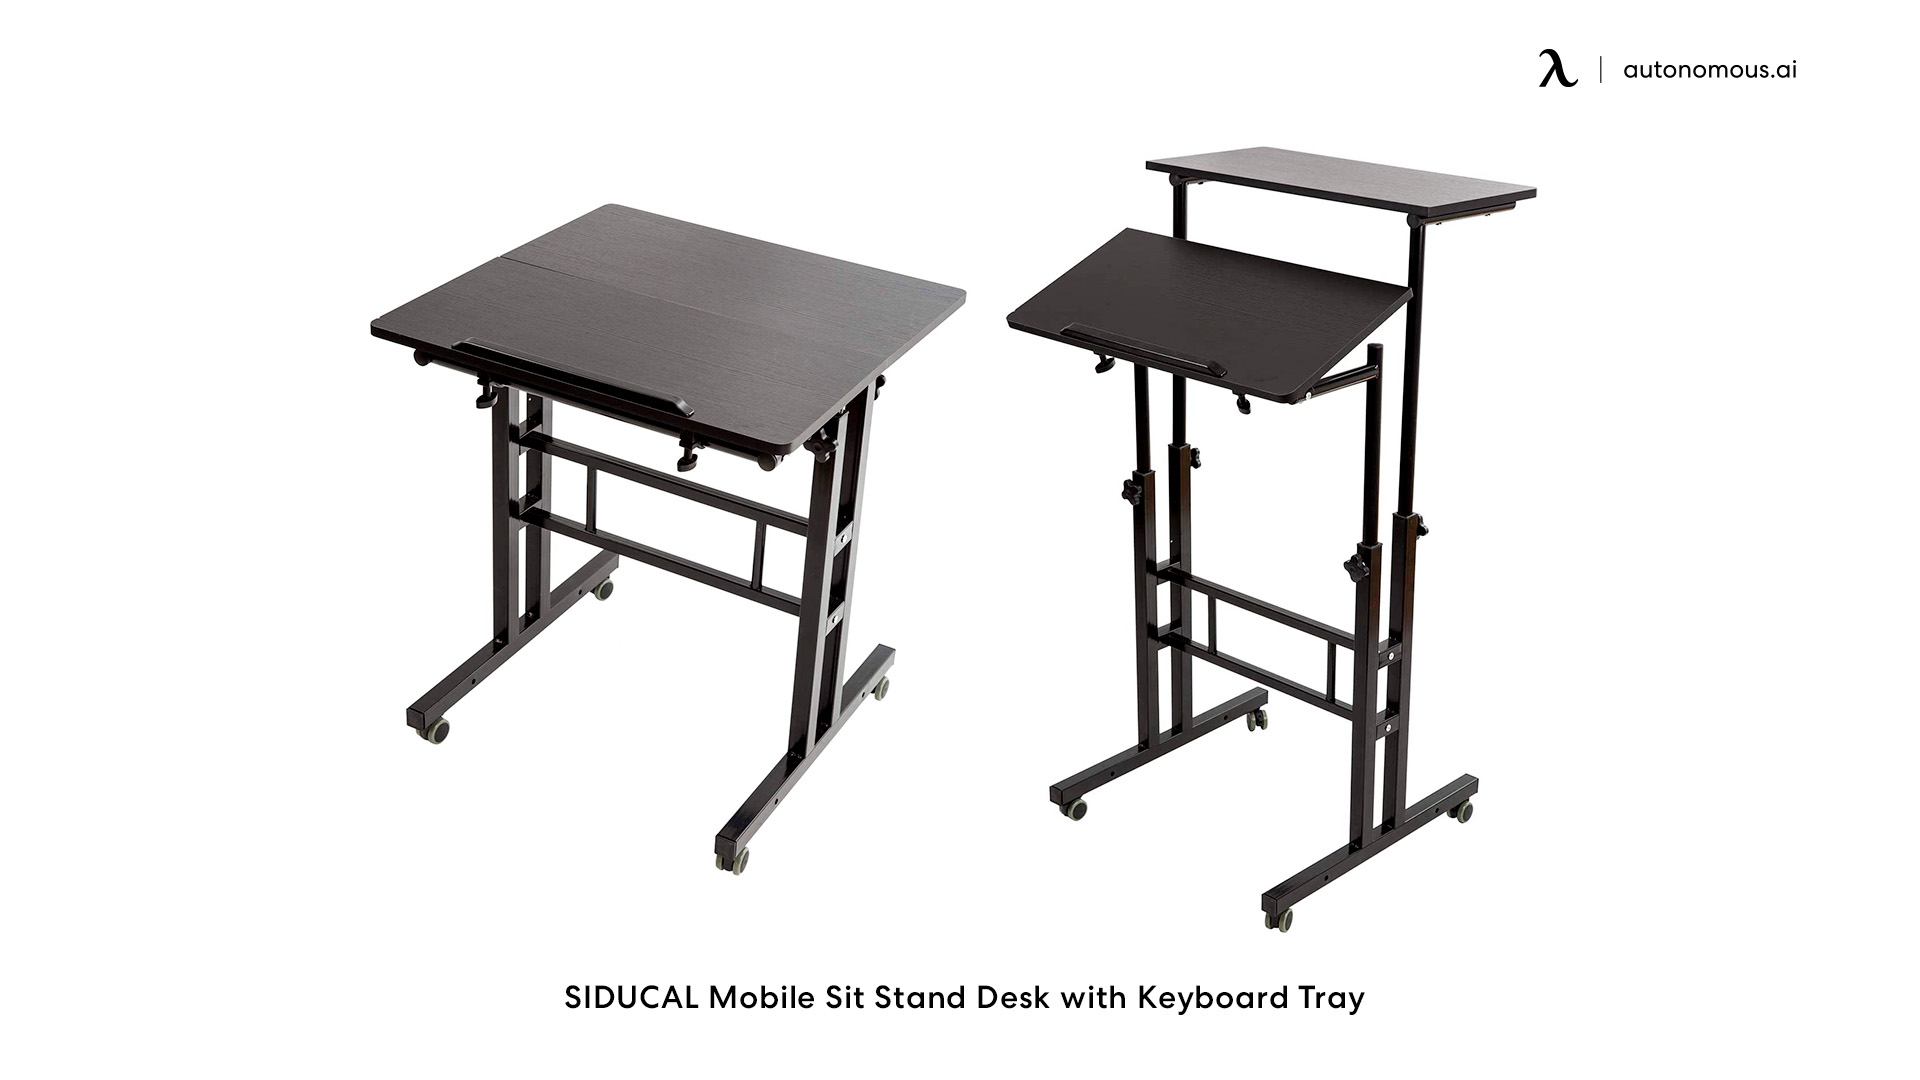 SIDUCAL Mobile standing desk with keyboard tray